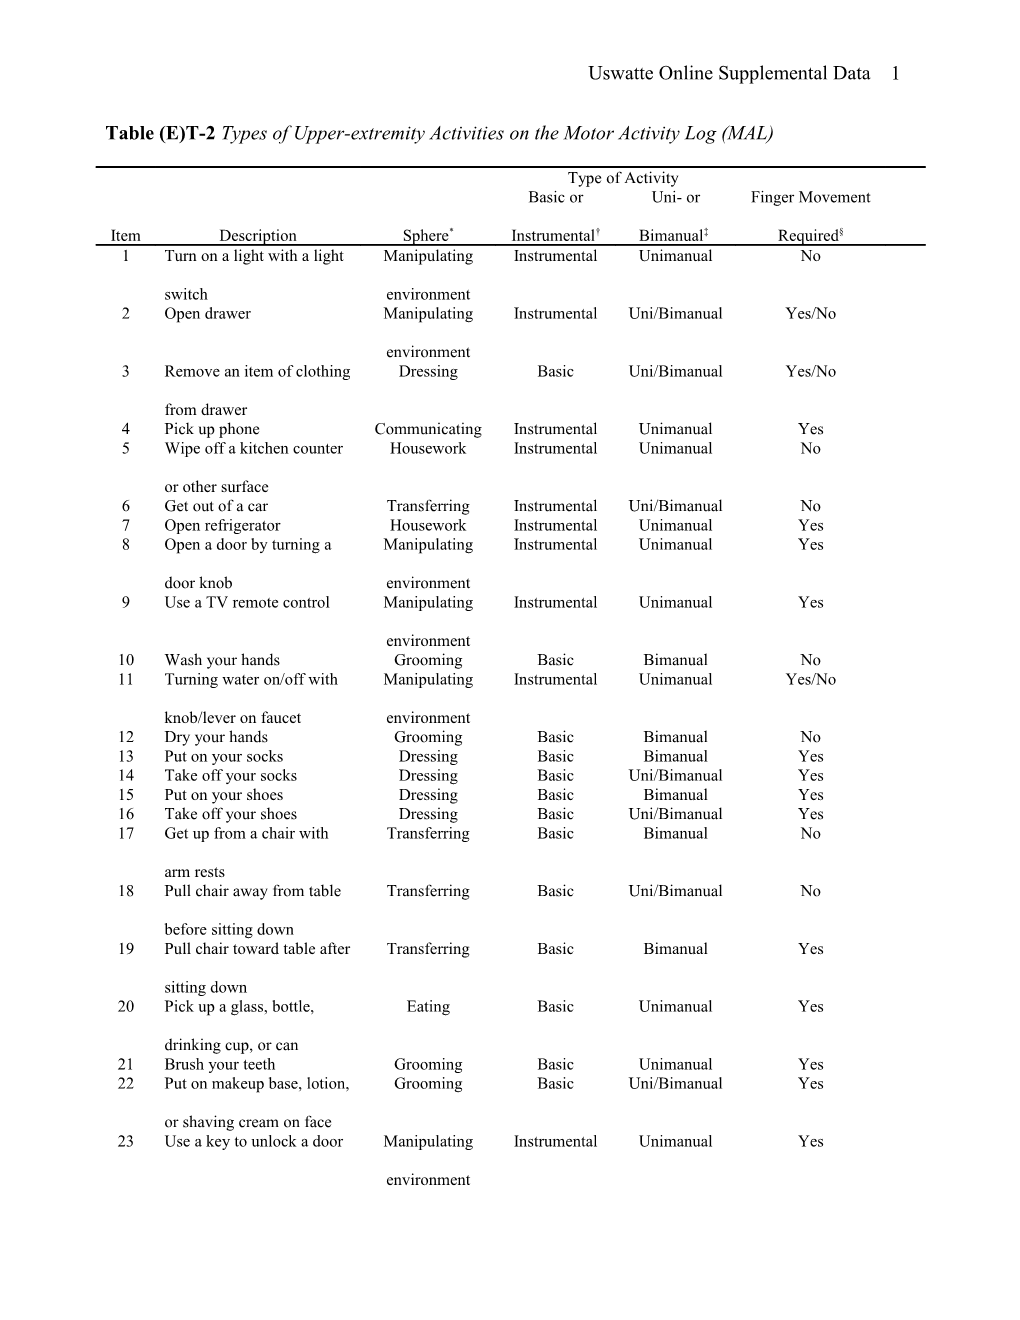 Table (E)T-2 Types of Upper-Extremity Activities on the Motor Activity Log (MAL)